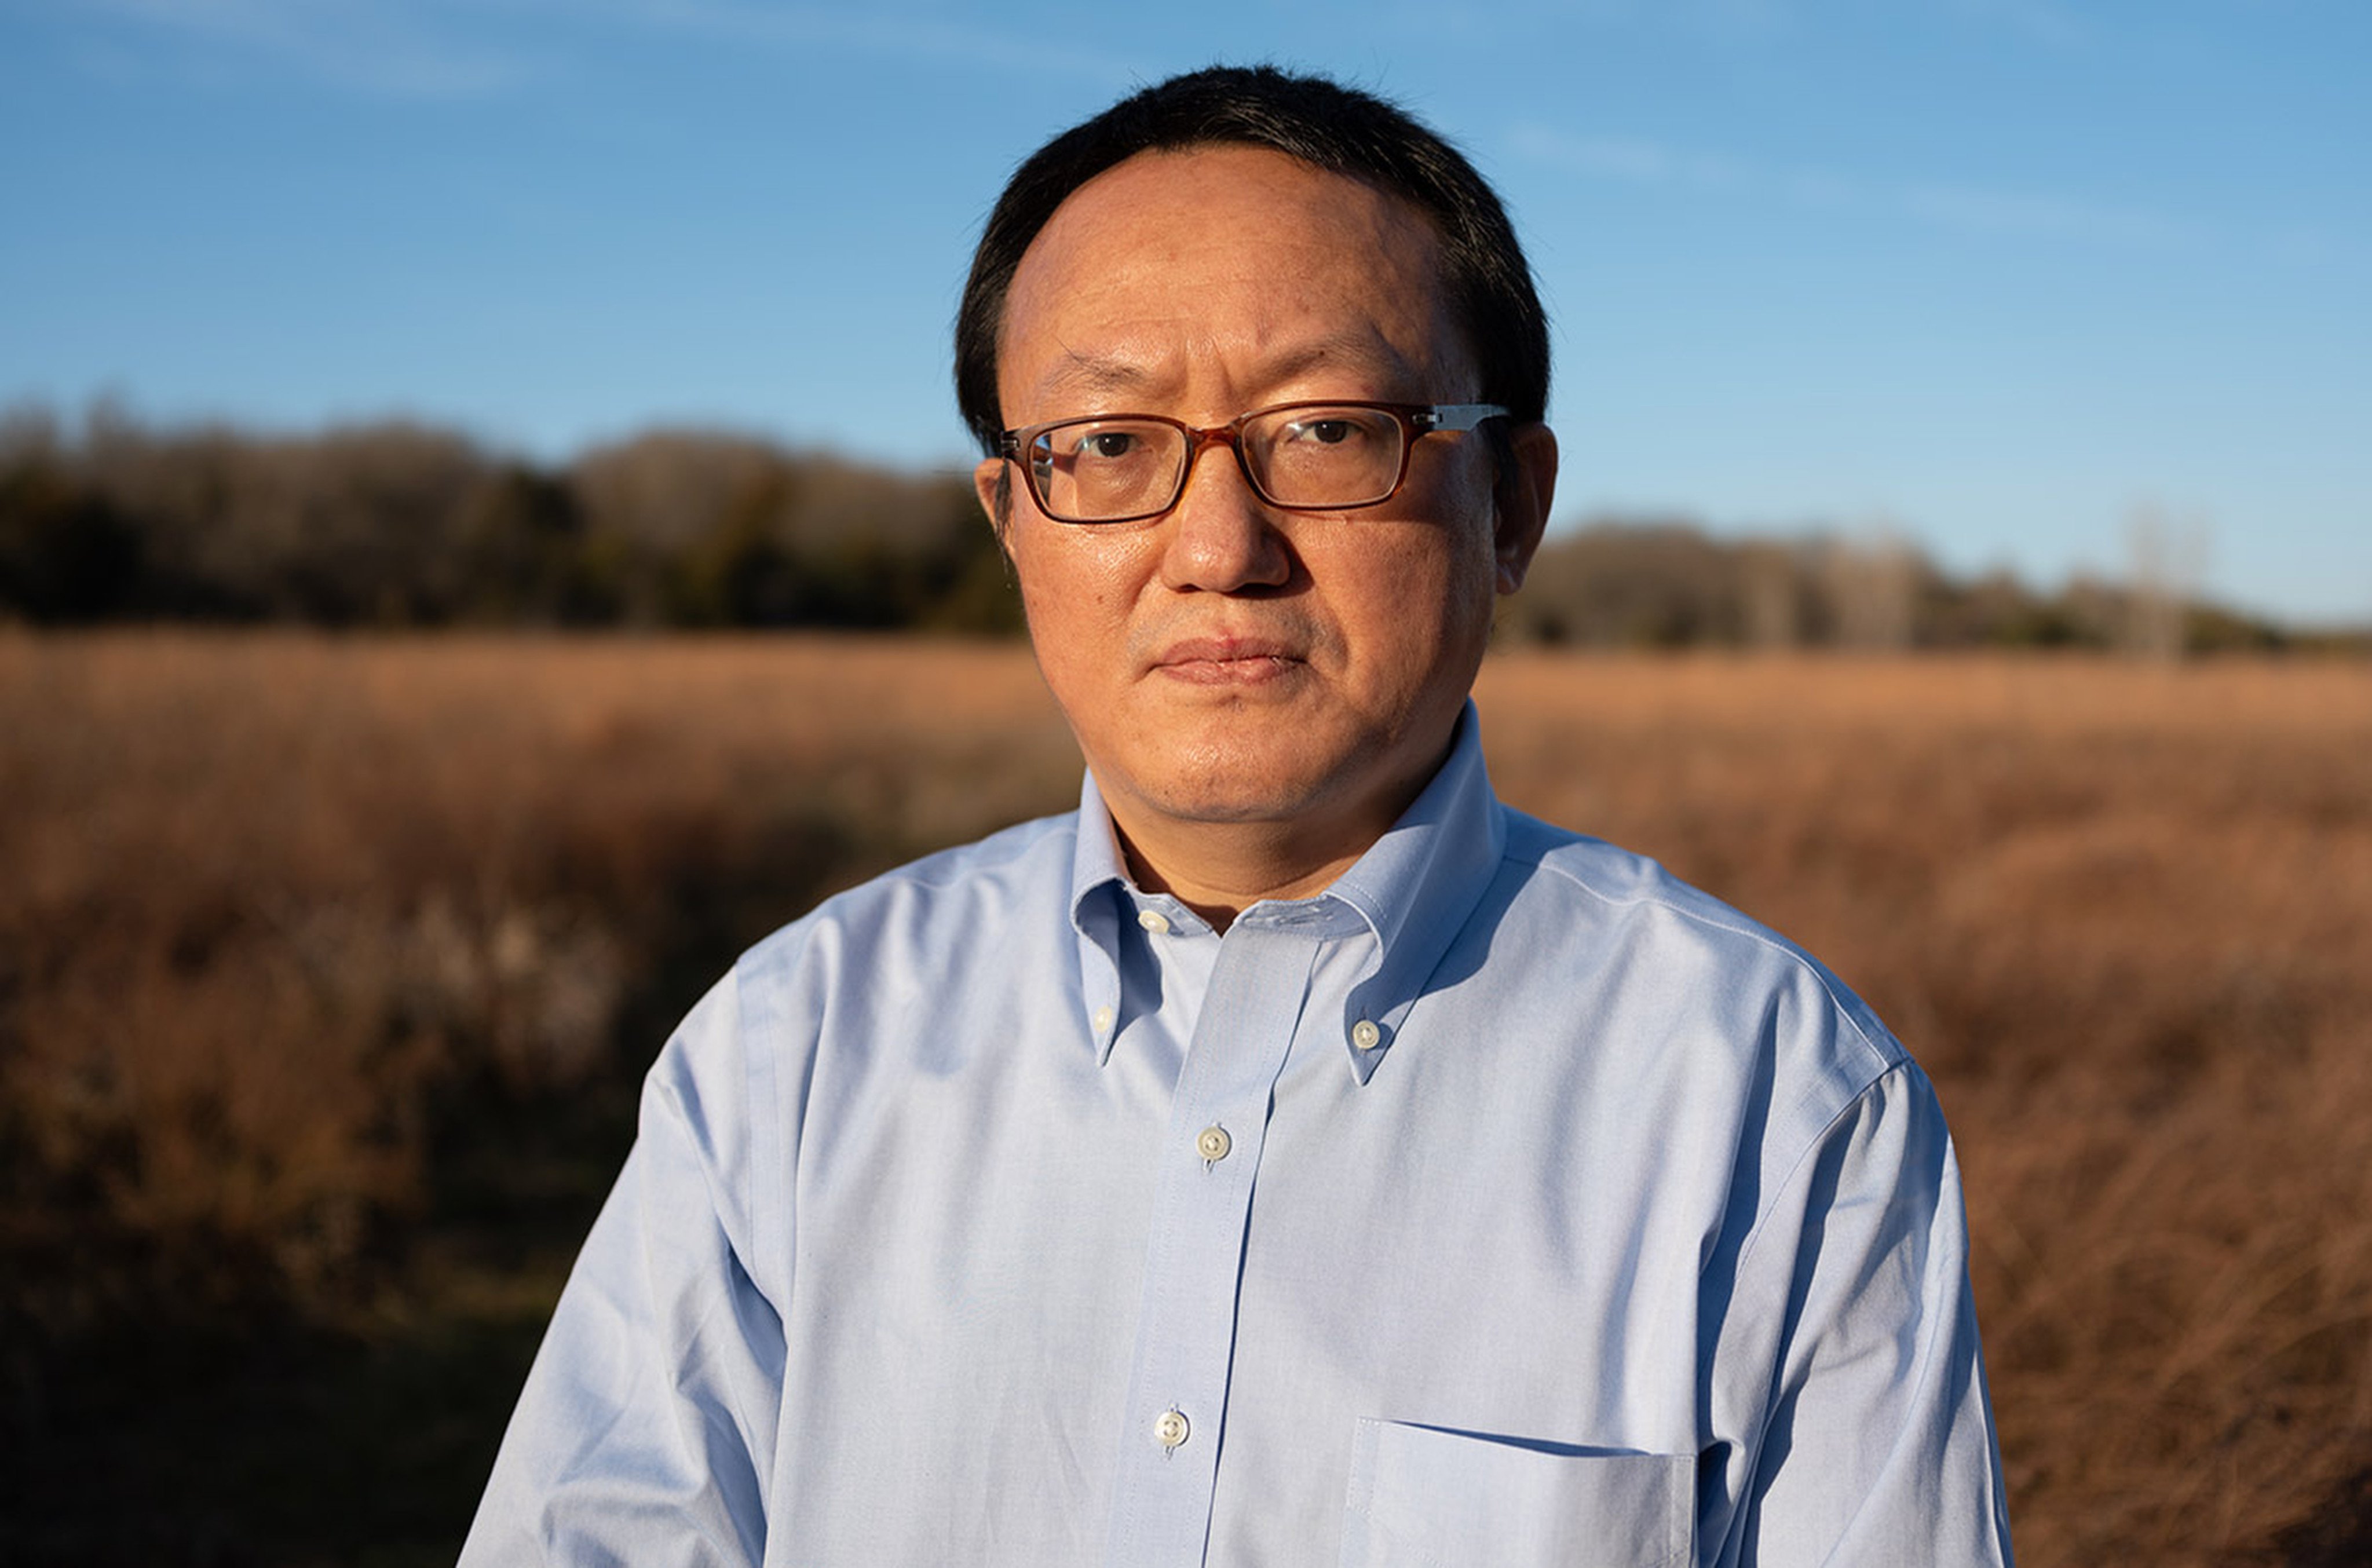 Professor Franklin Tao, formerly of the University of Kansas, has had all four convictions relating to wire fraud and false statement overturned by US courts. Photo: science.org